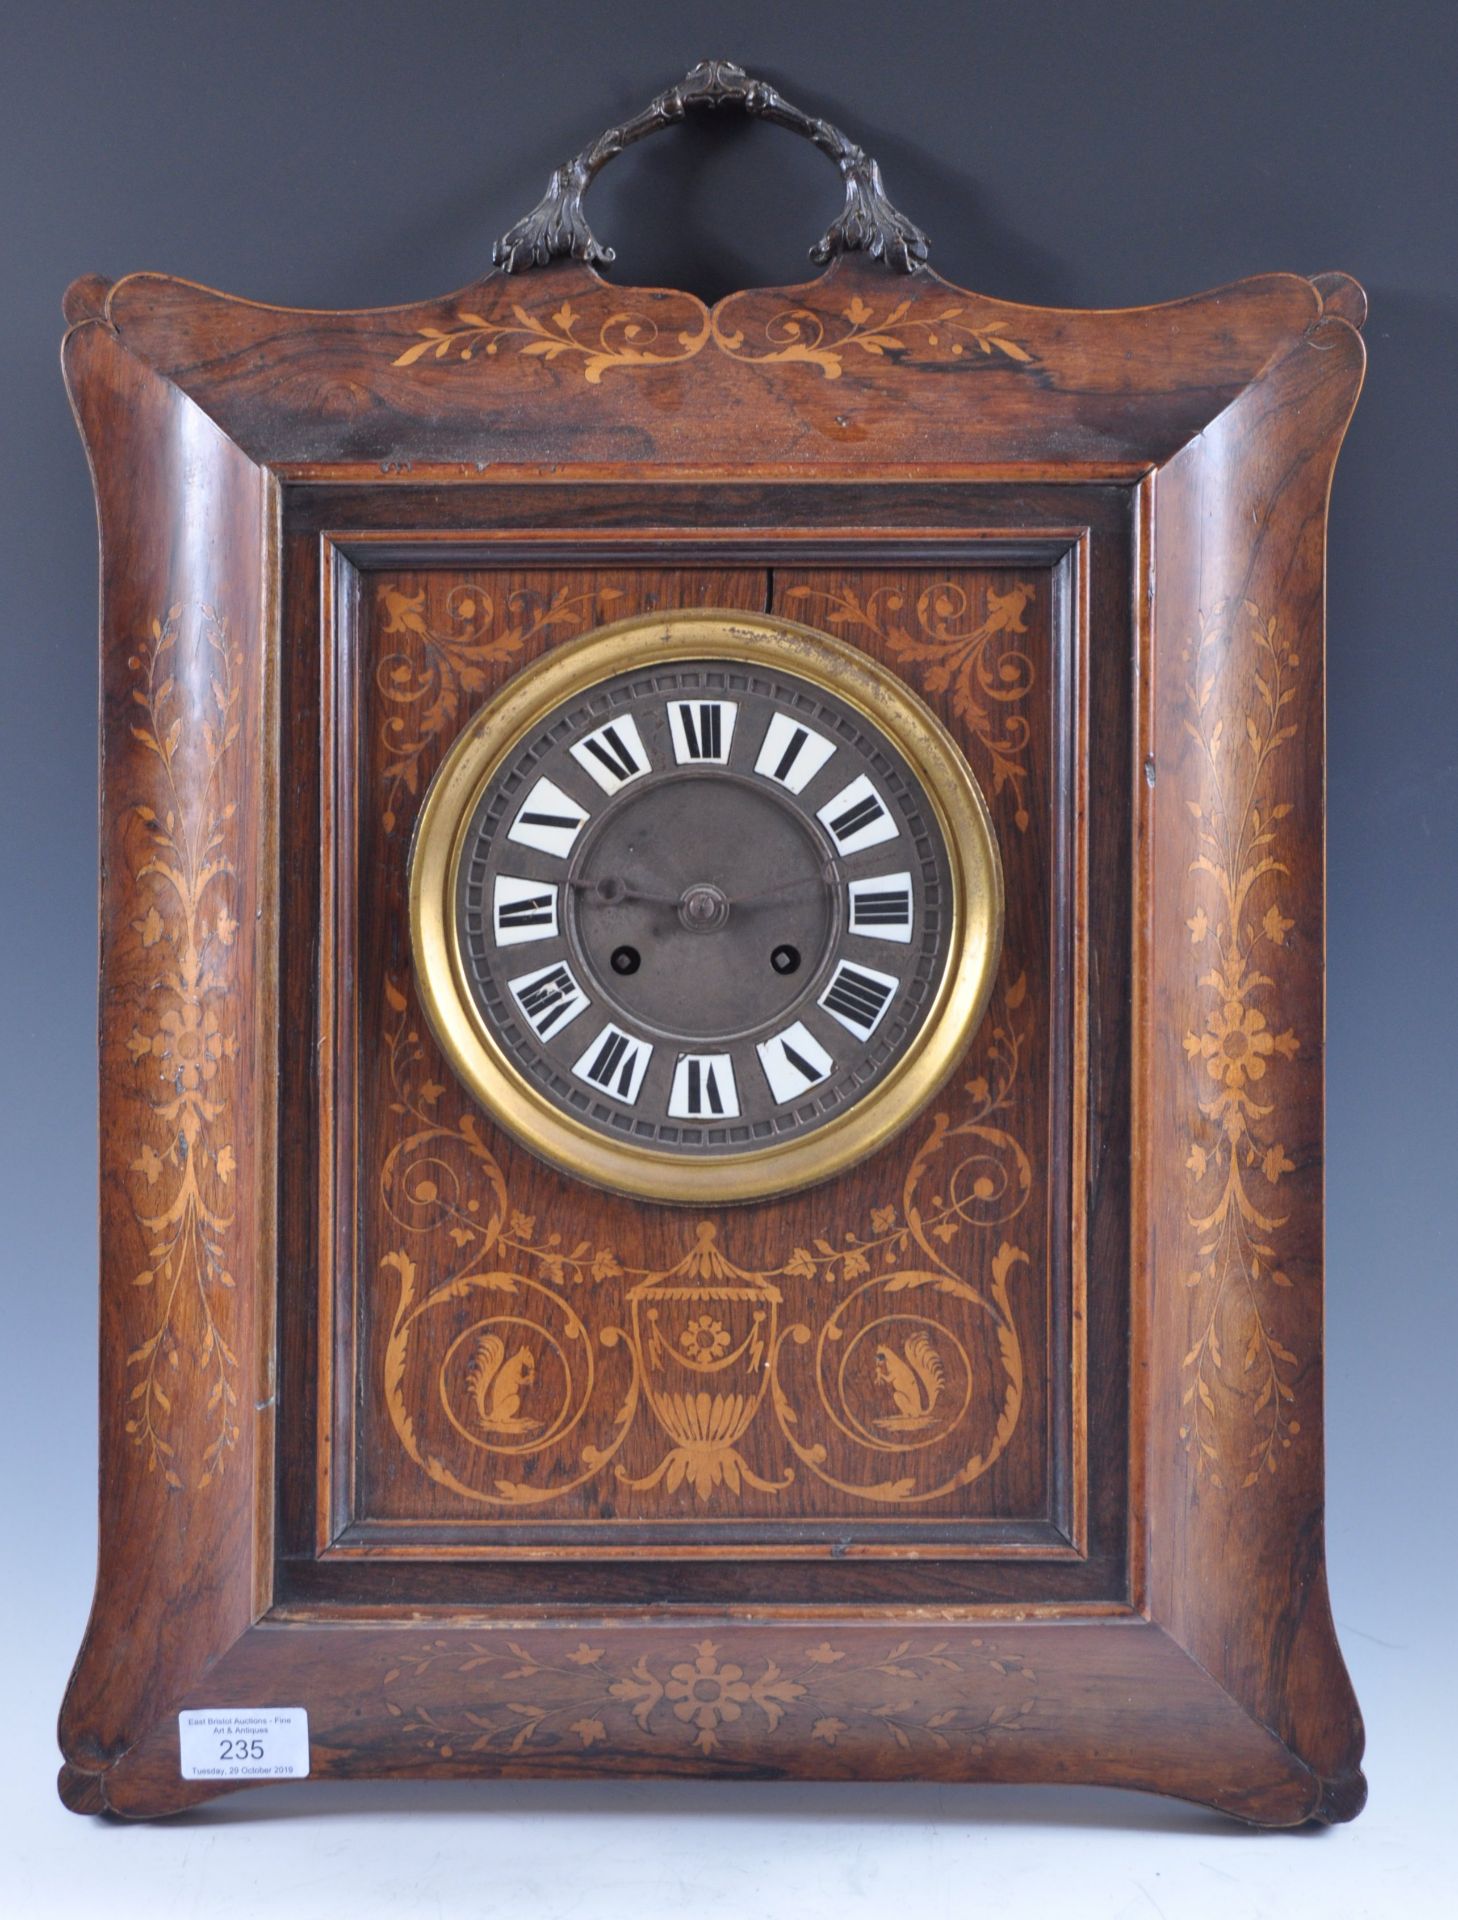 EDWARDIAN ROSEWOOD AND INLAID BRONZED HANDLED WALL CLOCK